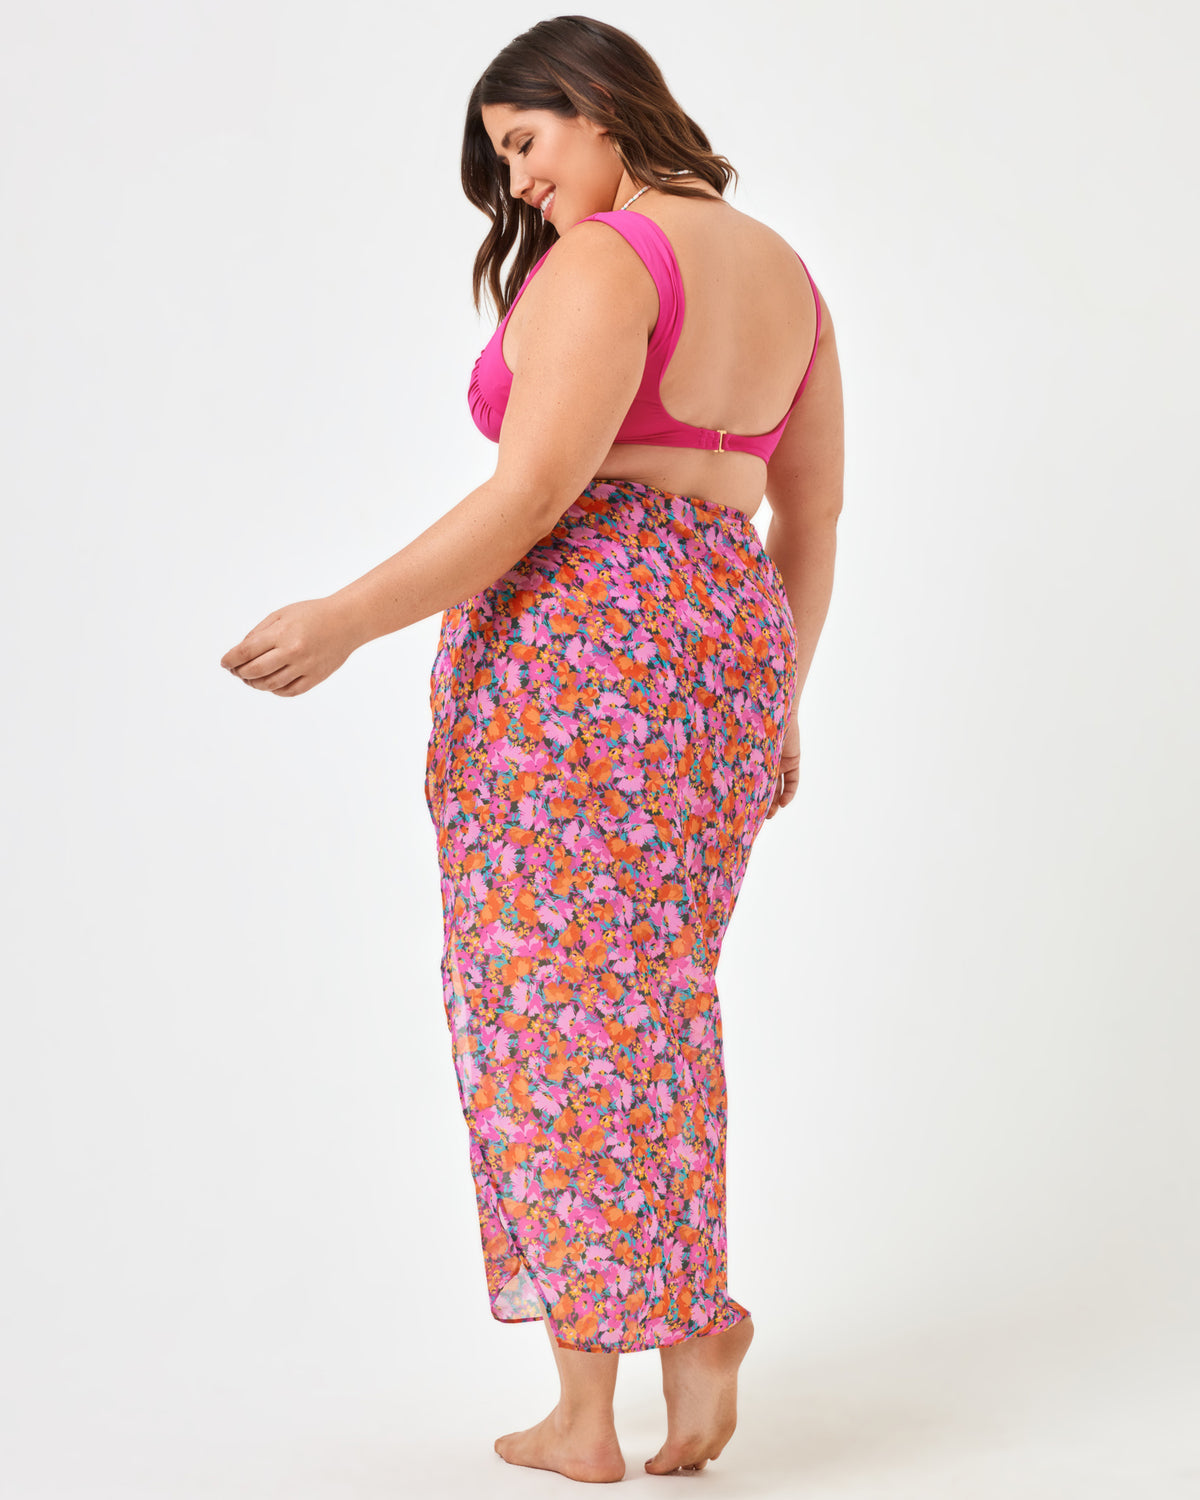 Mia Cover-Up - Positively Poppies Positively Poppies | Model: Jessica (size: XL)